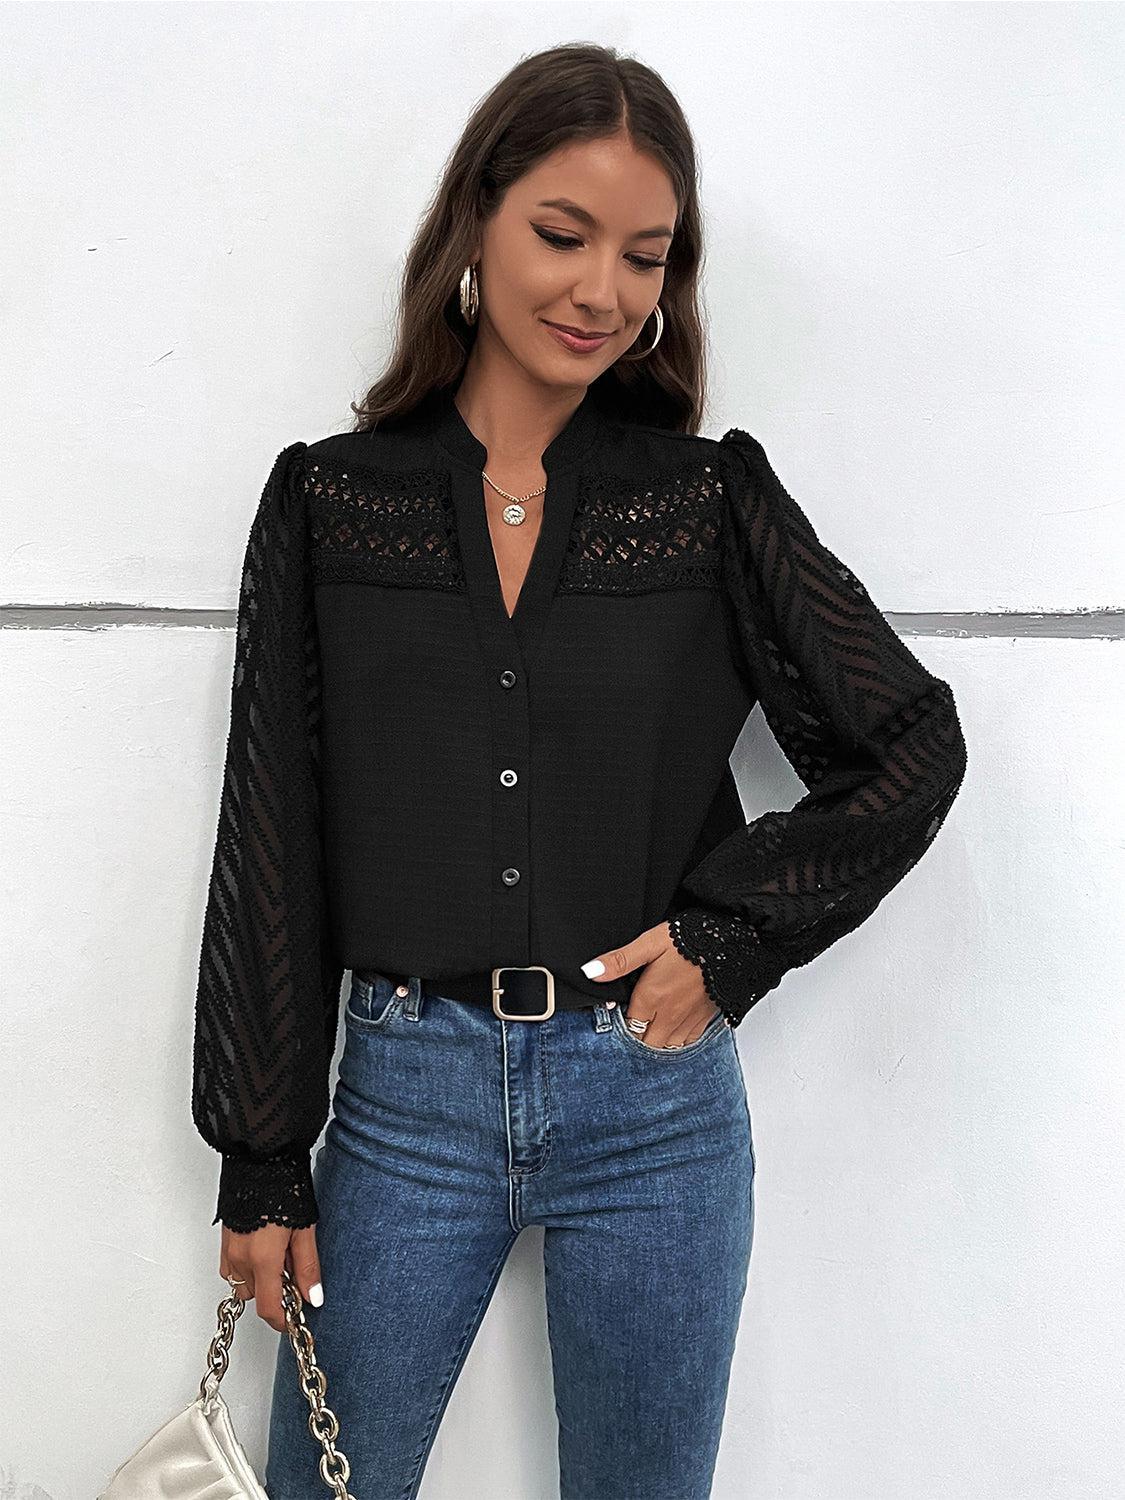 a woman wearing a black shirt and jeans